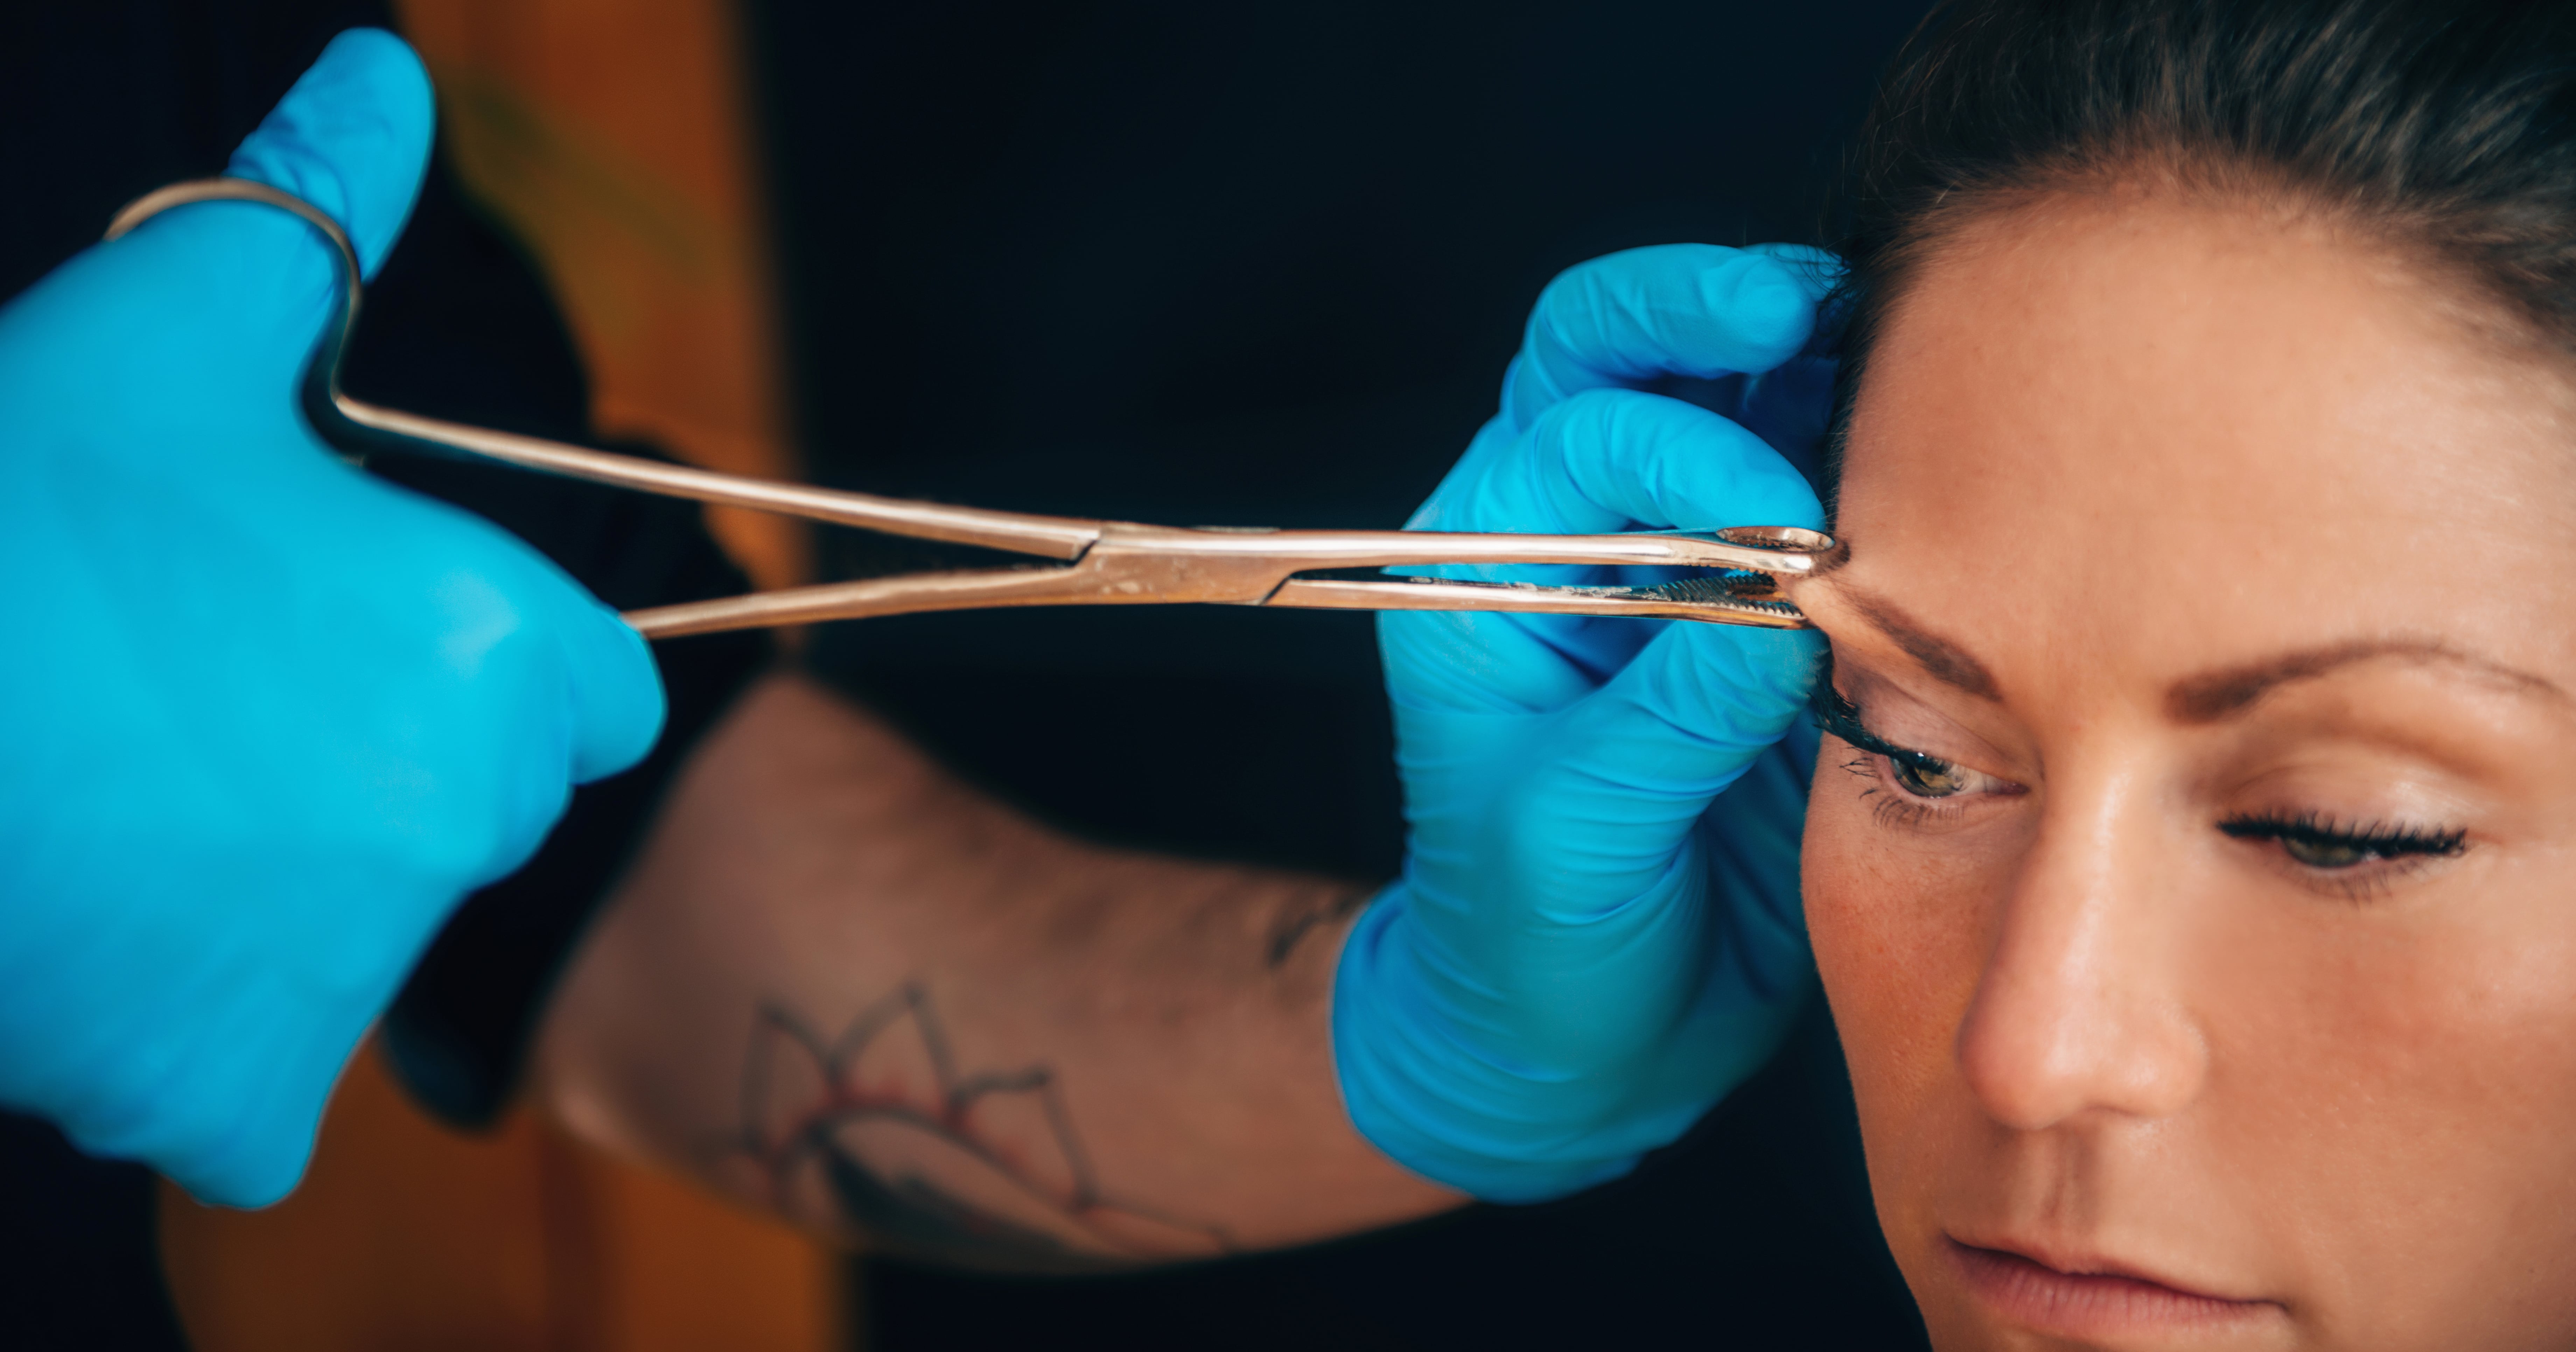 Everything You Need to Know About Eyebrow Piercings